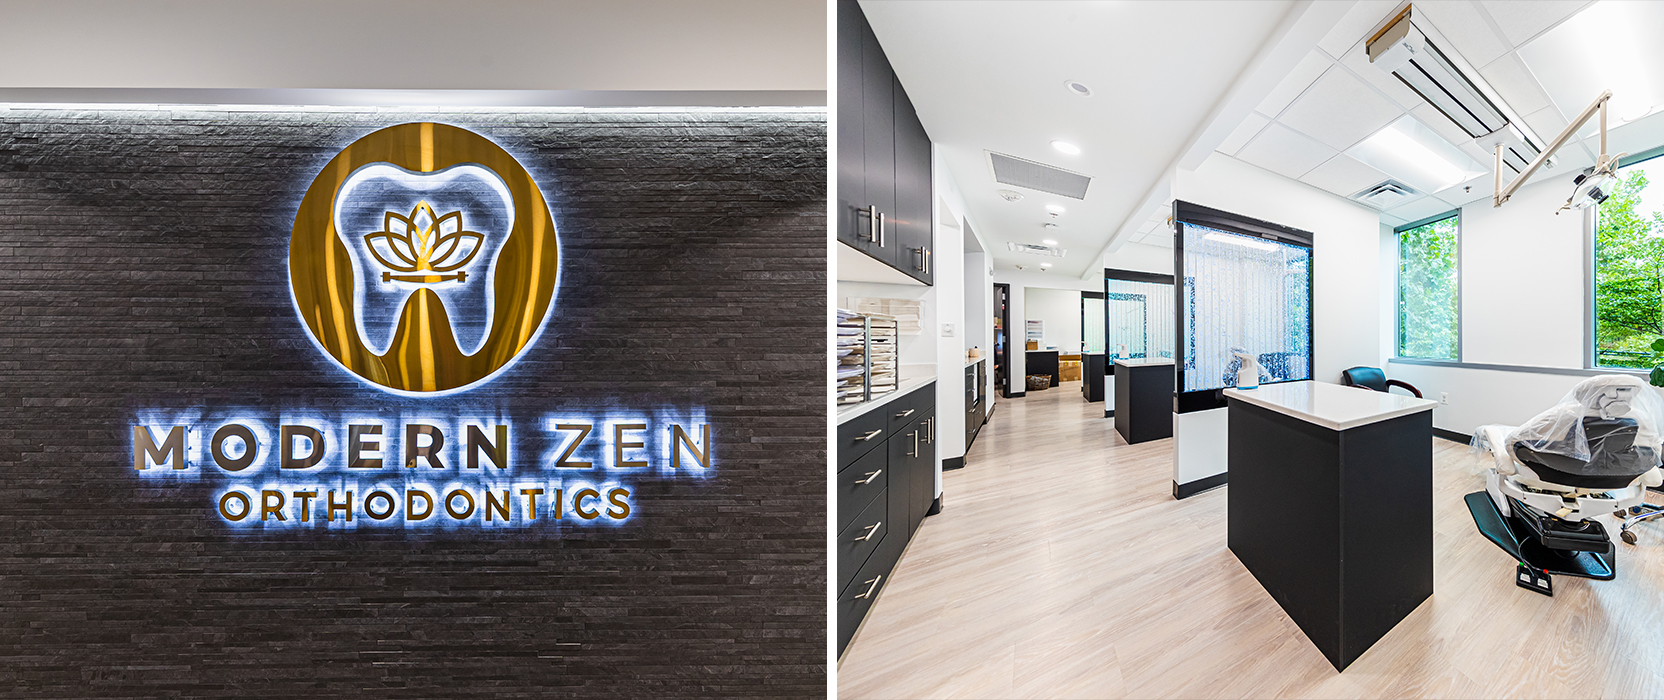 Closeup of backlit logo for Modern Zen Orthodontics and shot of modern patient areas with white walls, black trim and cabinetry and light wood floors.